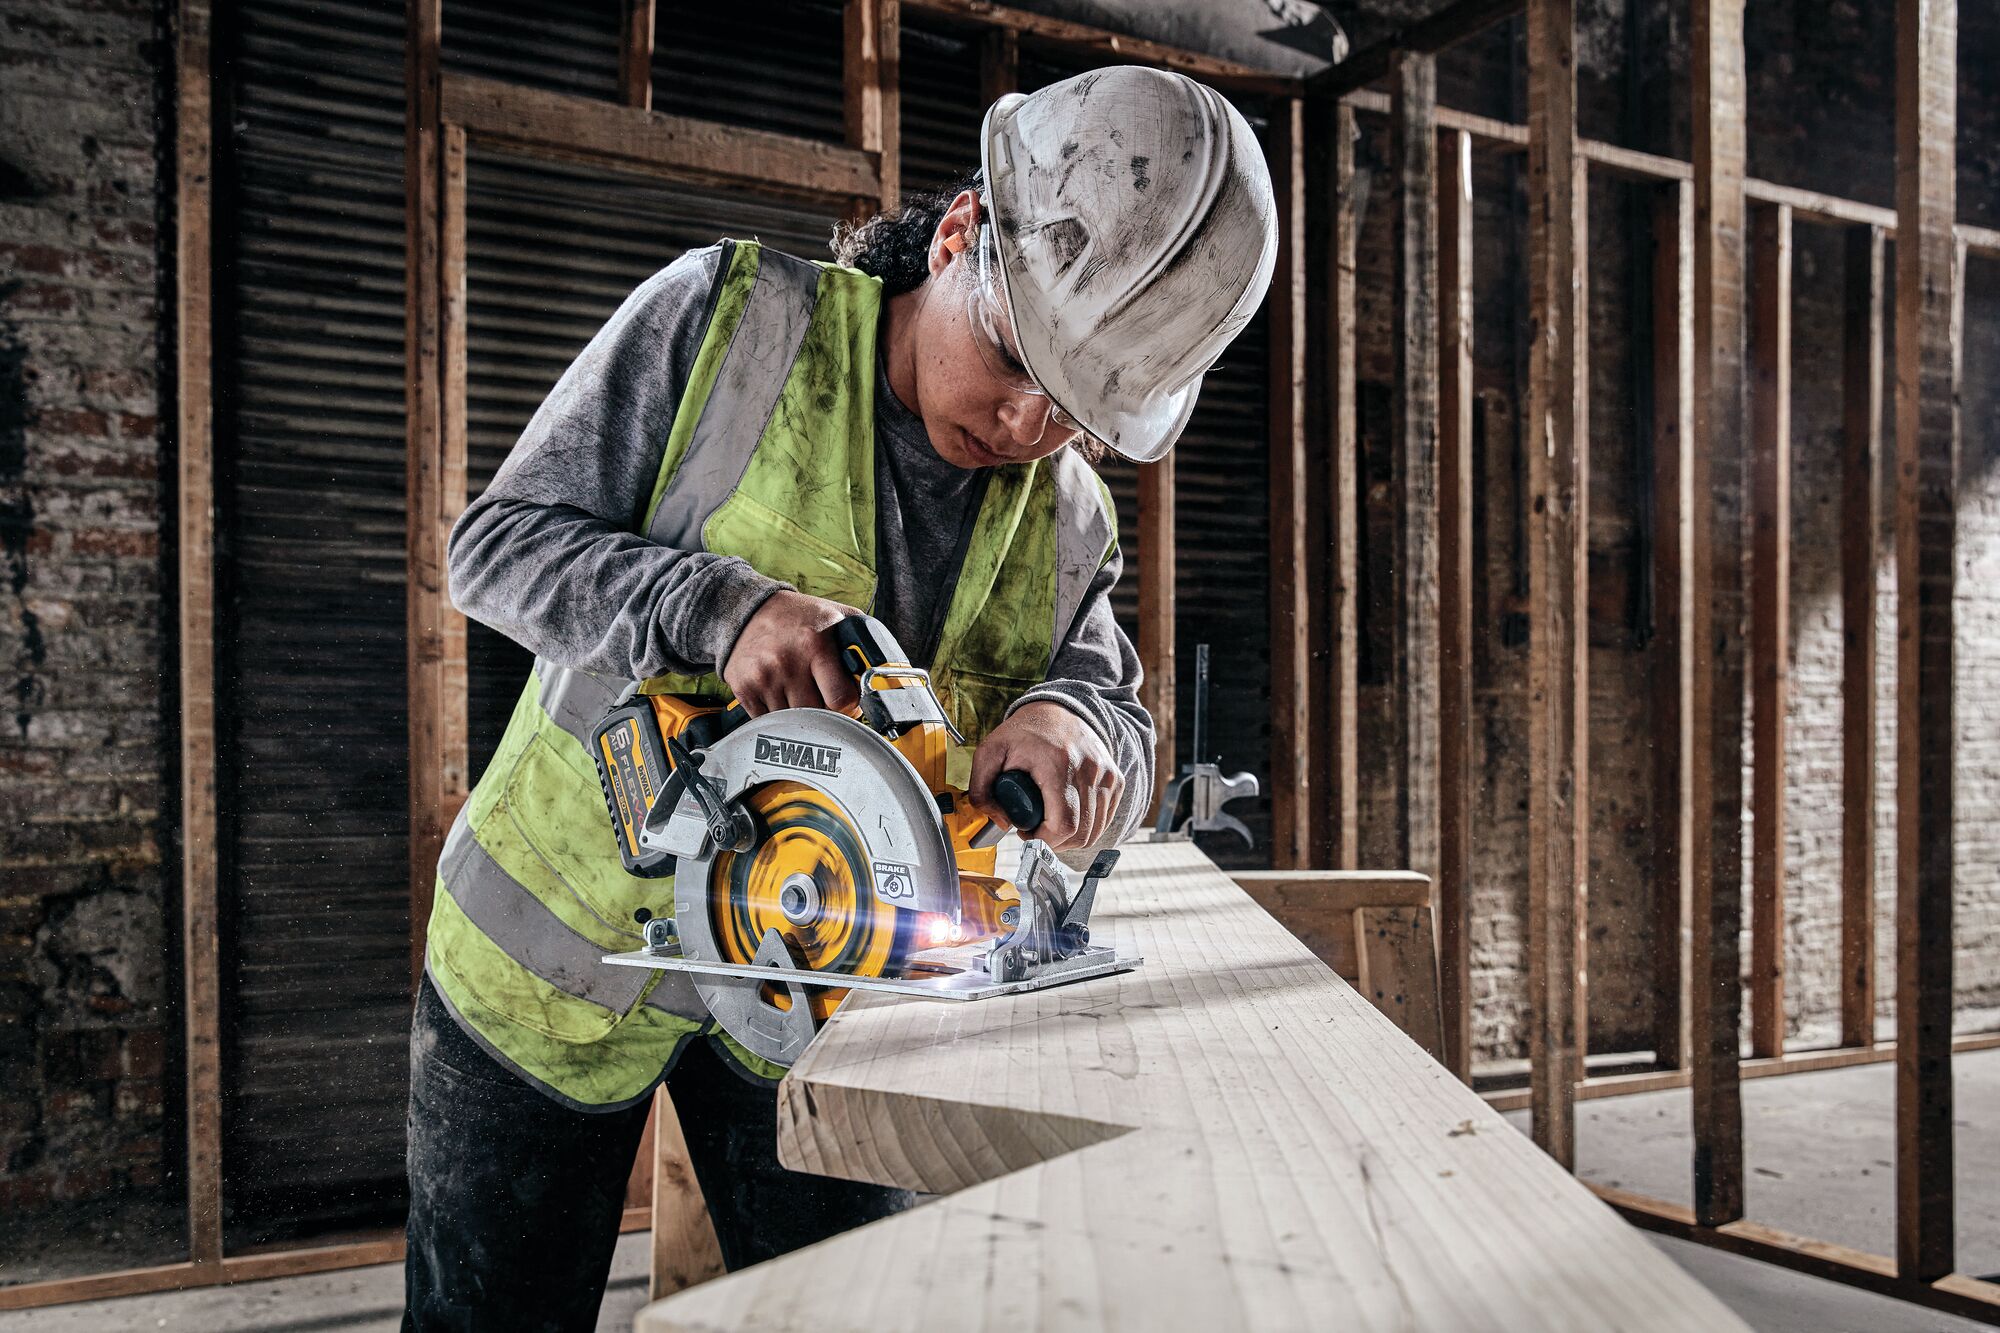 Brushless cordless circular saw with FLEXVOLT Advantage being used by person to cut wooden plank.